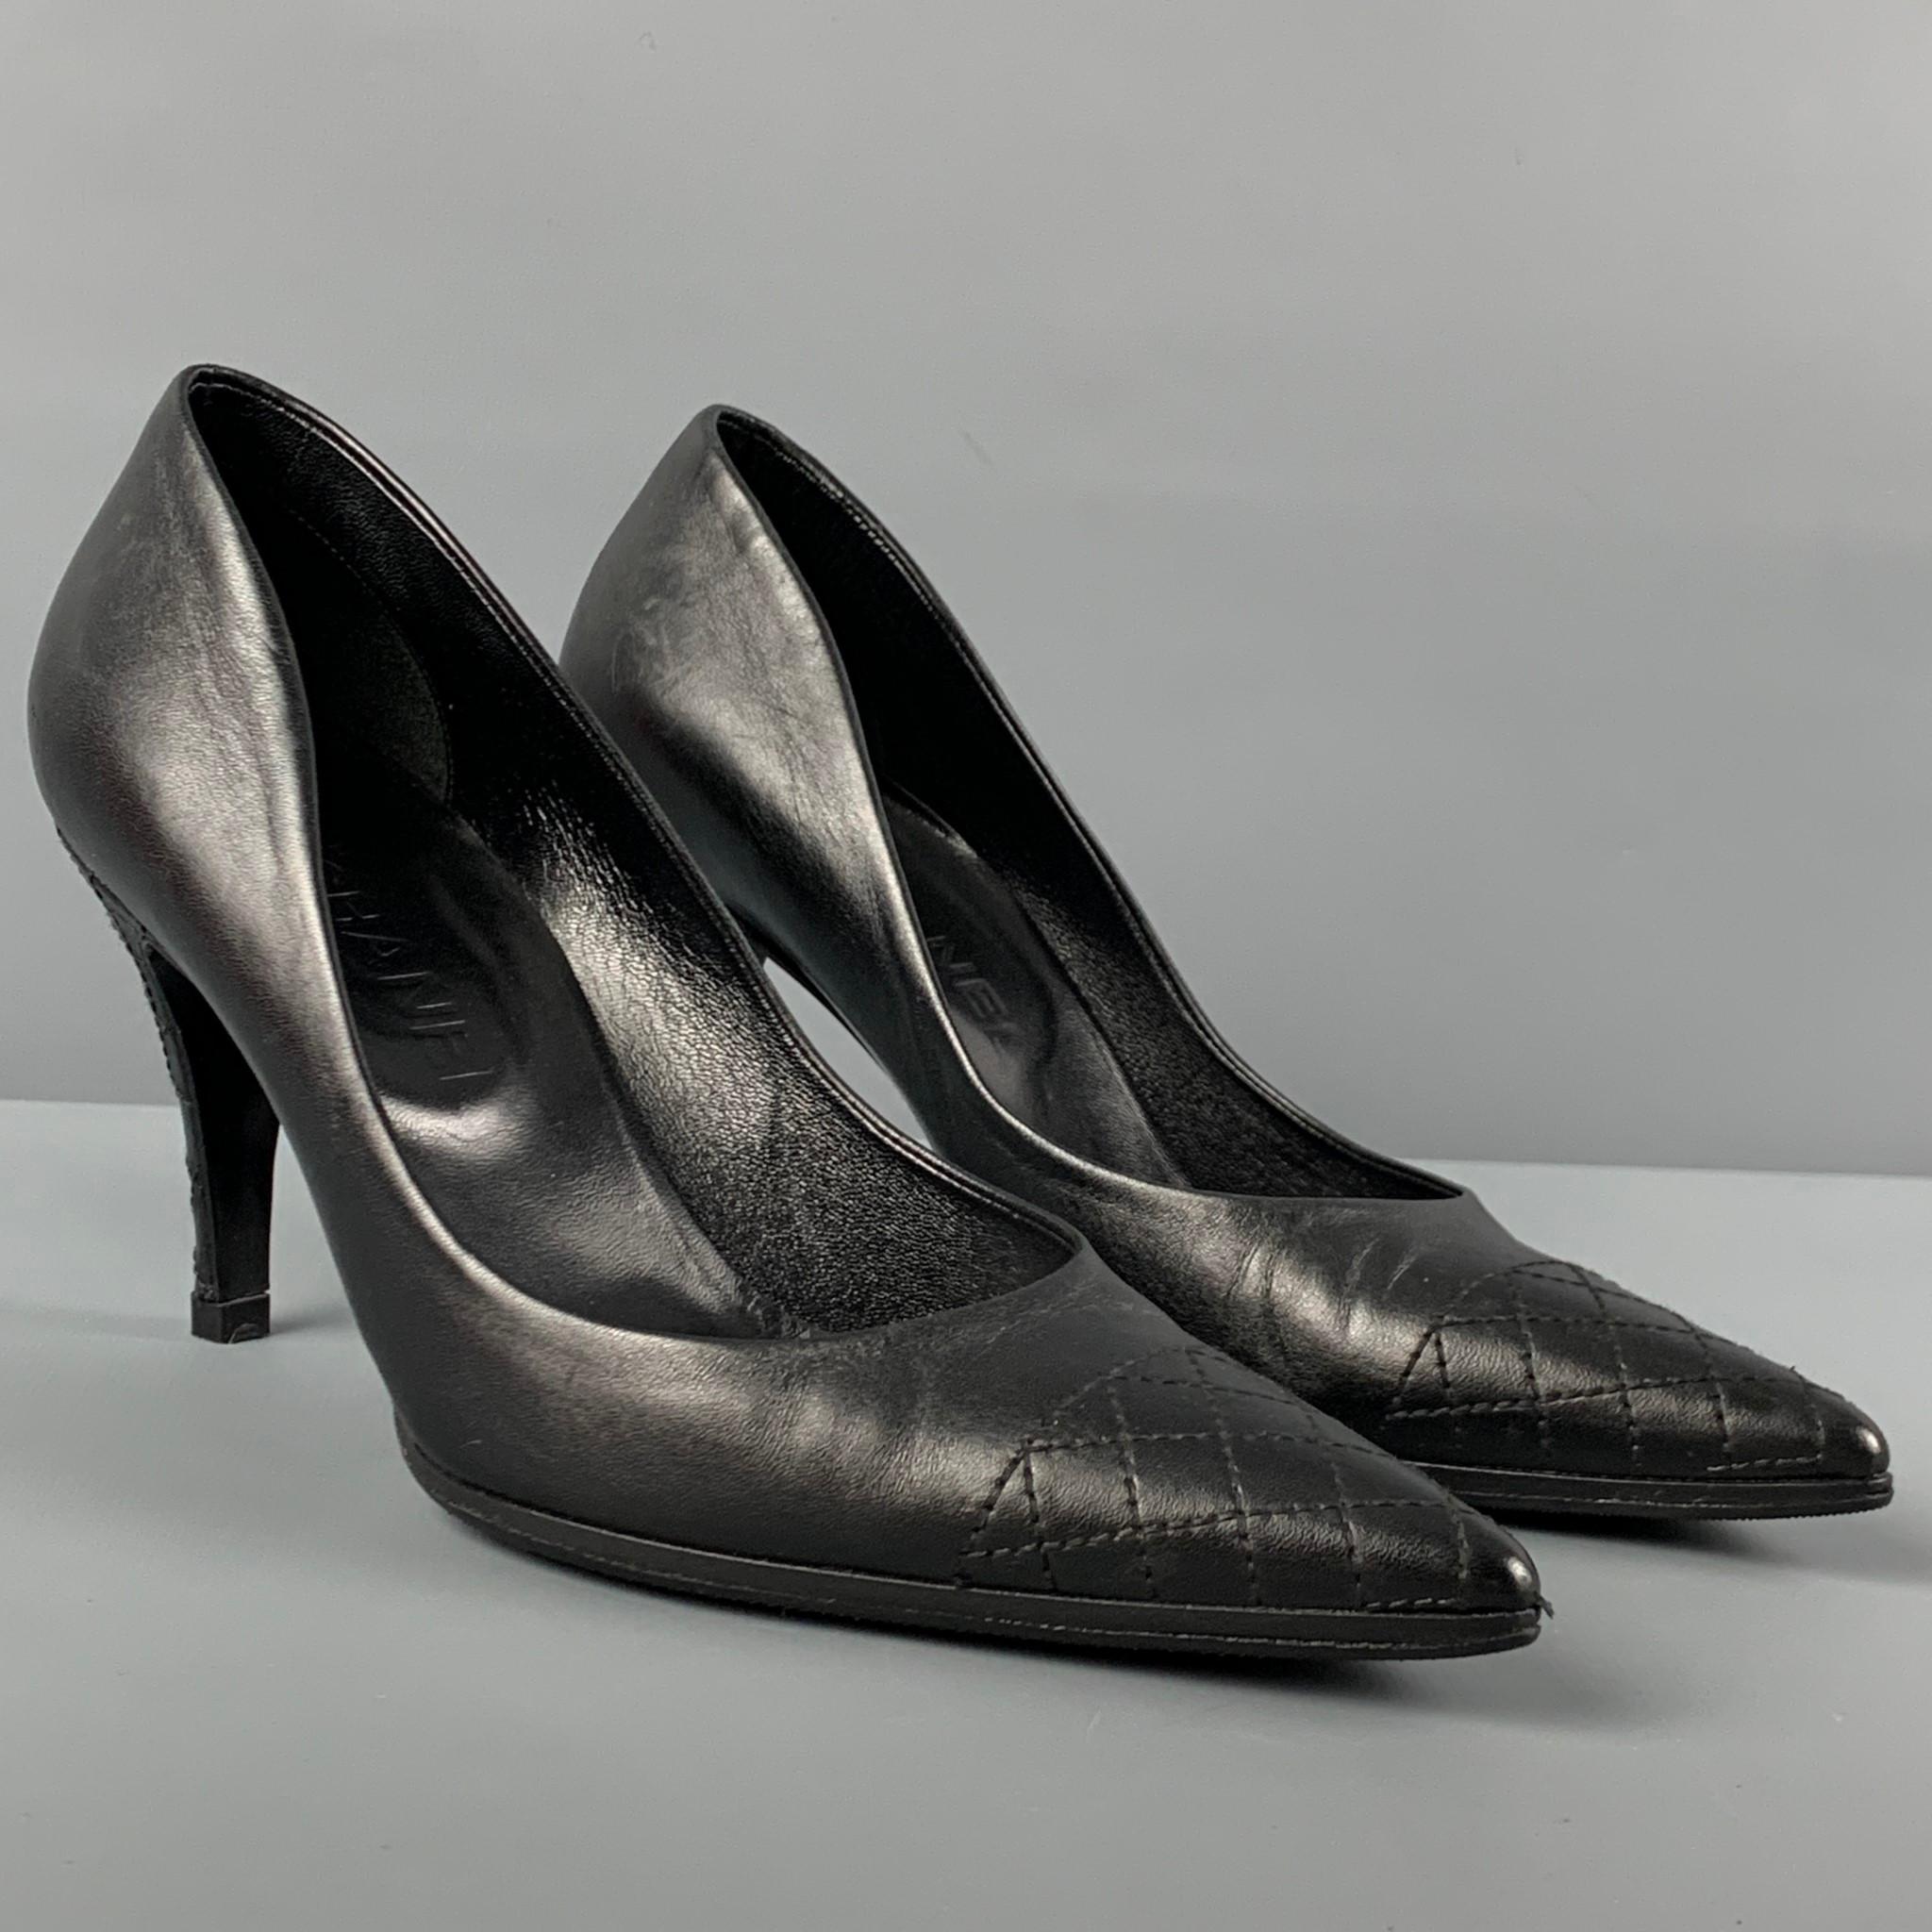 CHANEL pumps comes in a black leather featuring a pointed toe, quilted details, and a stiletto heel. Made in Italy. 

Very Good Pre-Owned Condition.
Marked: 37

Measurements:

Heel: 3.25 in. 